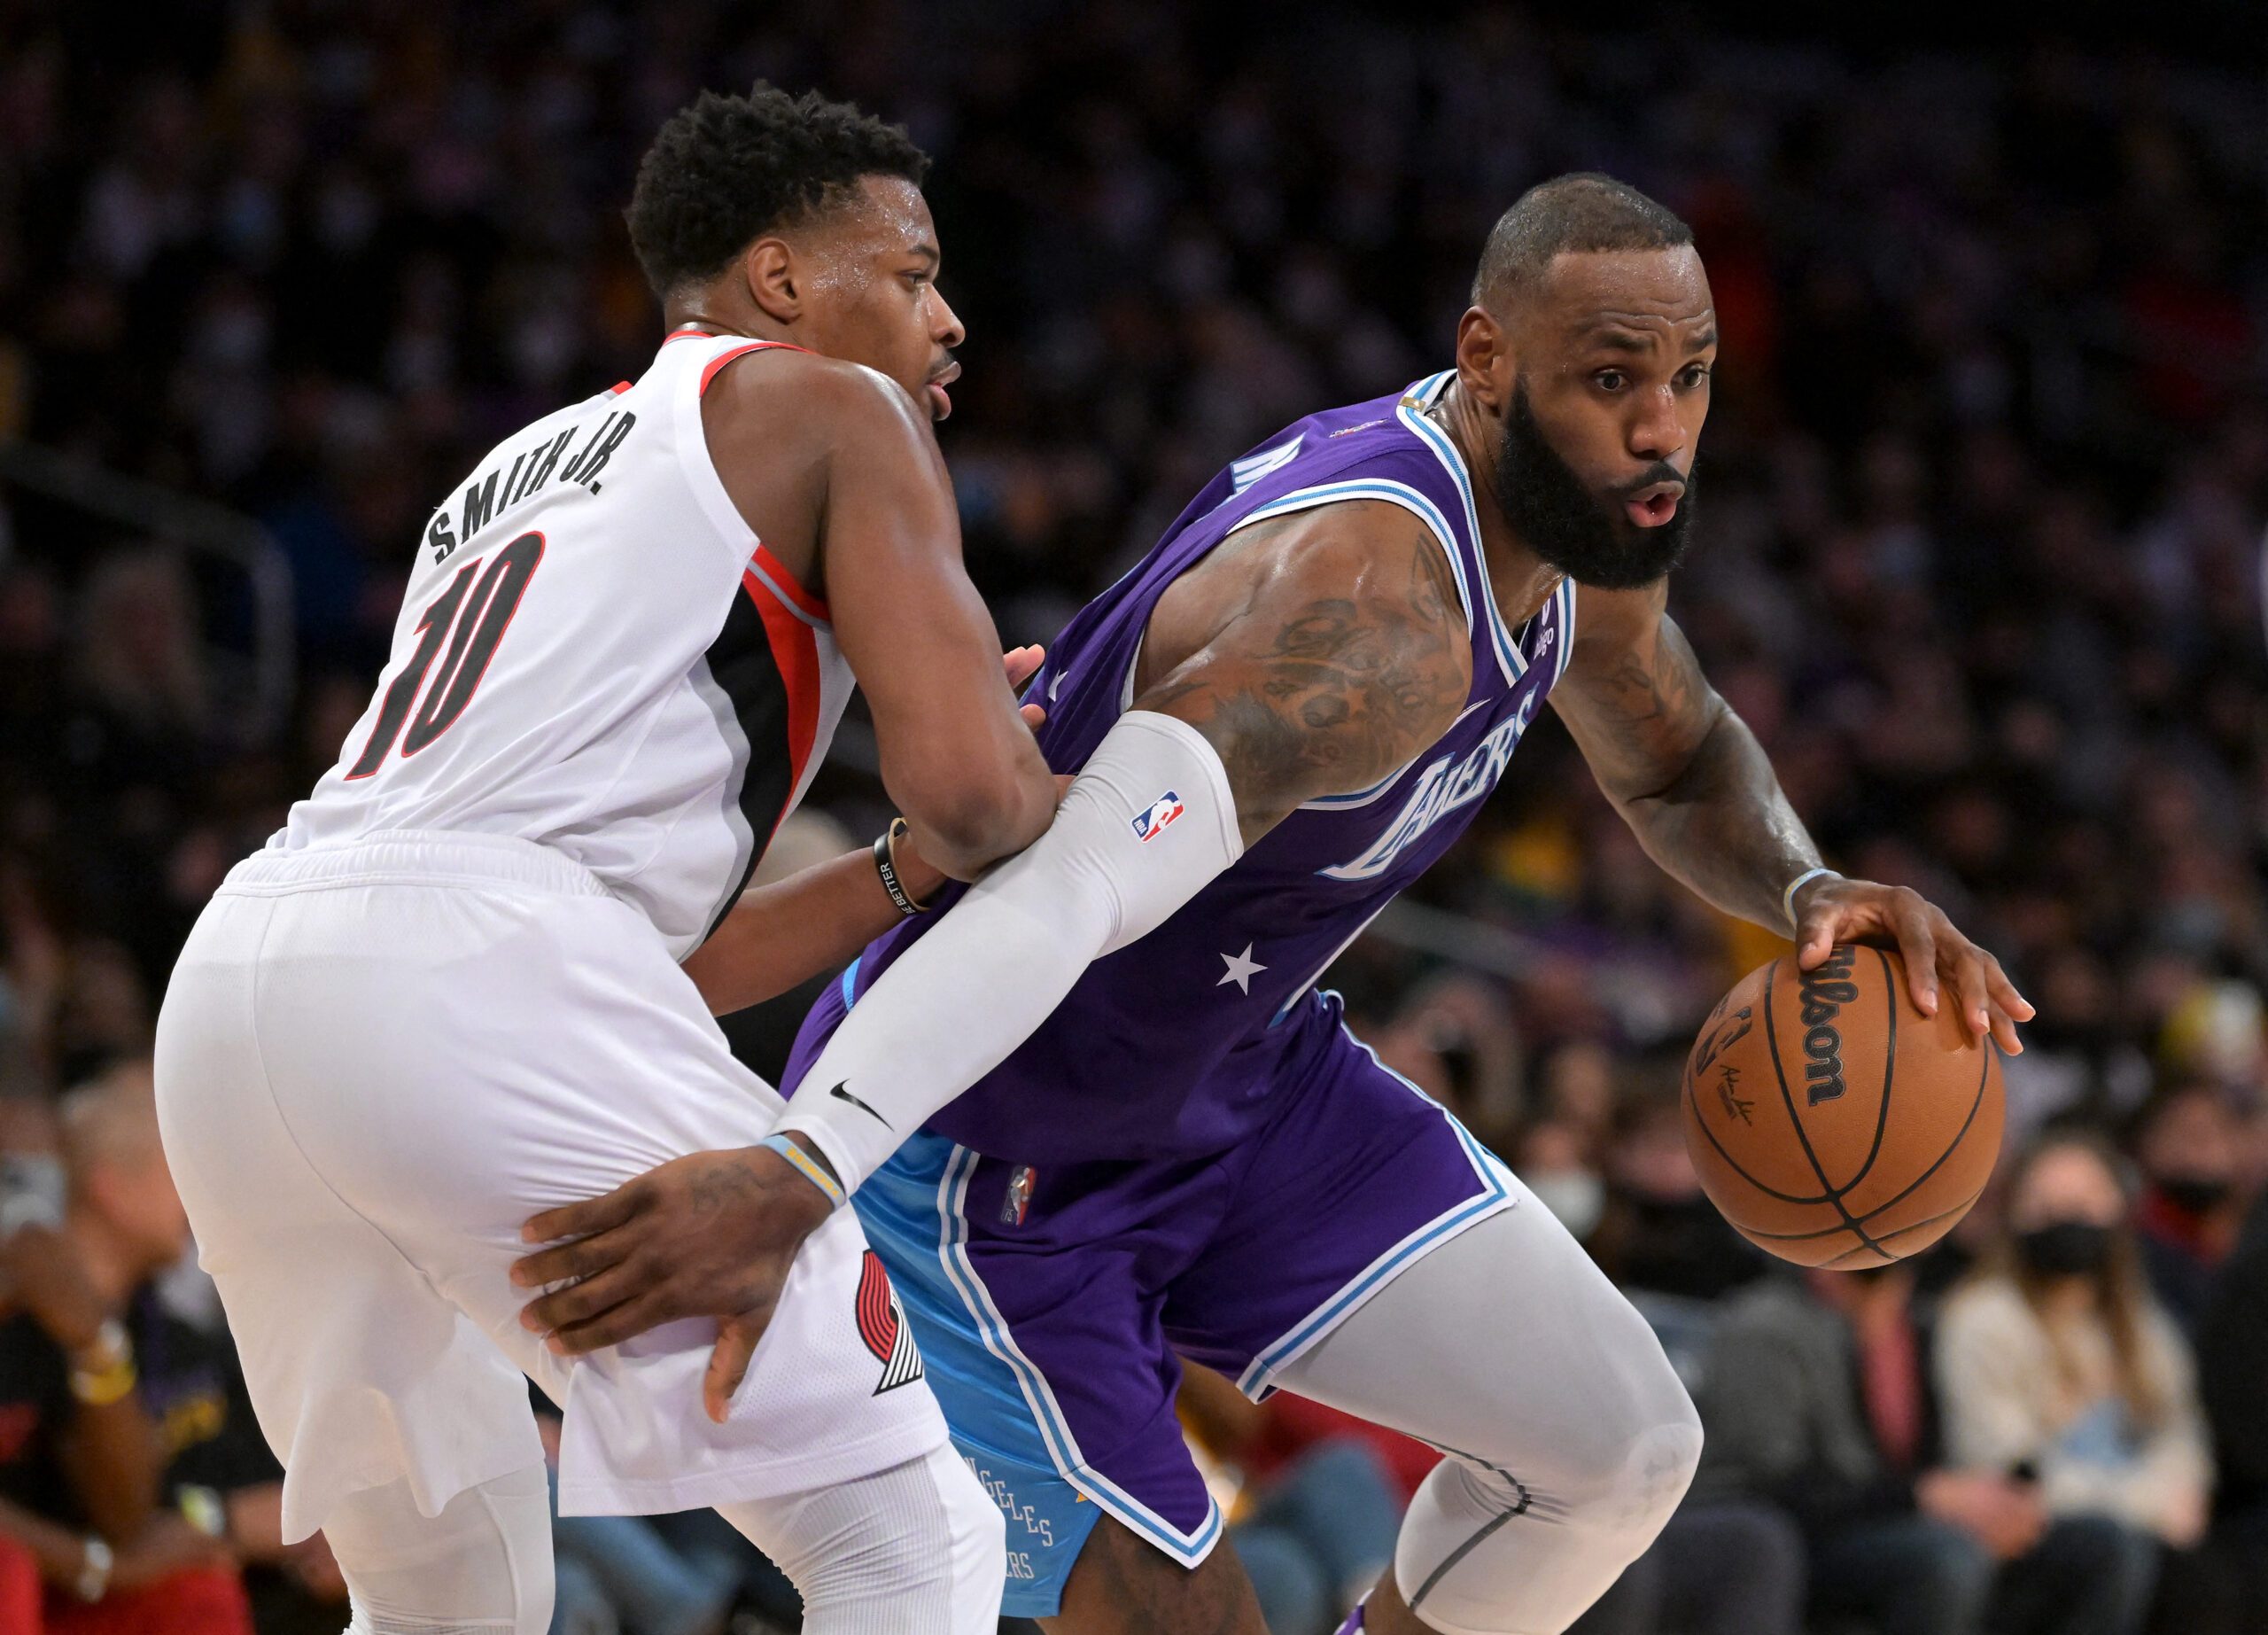 LeBron James, Russell Westbrook carry Lakers to rout of Blazers